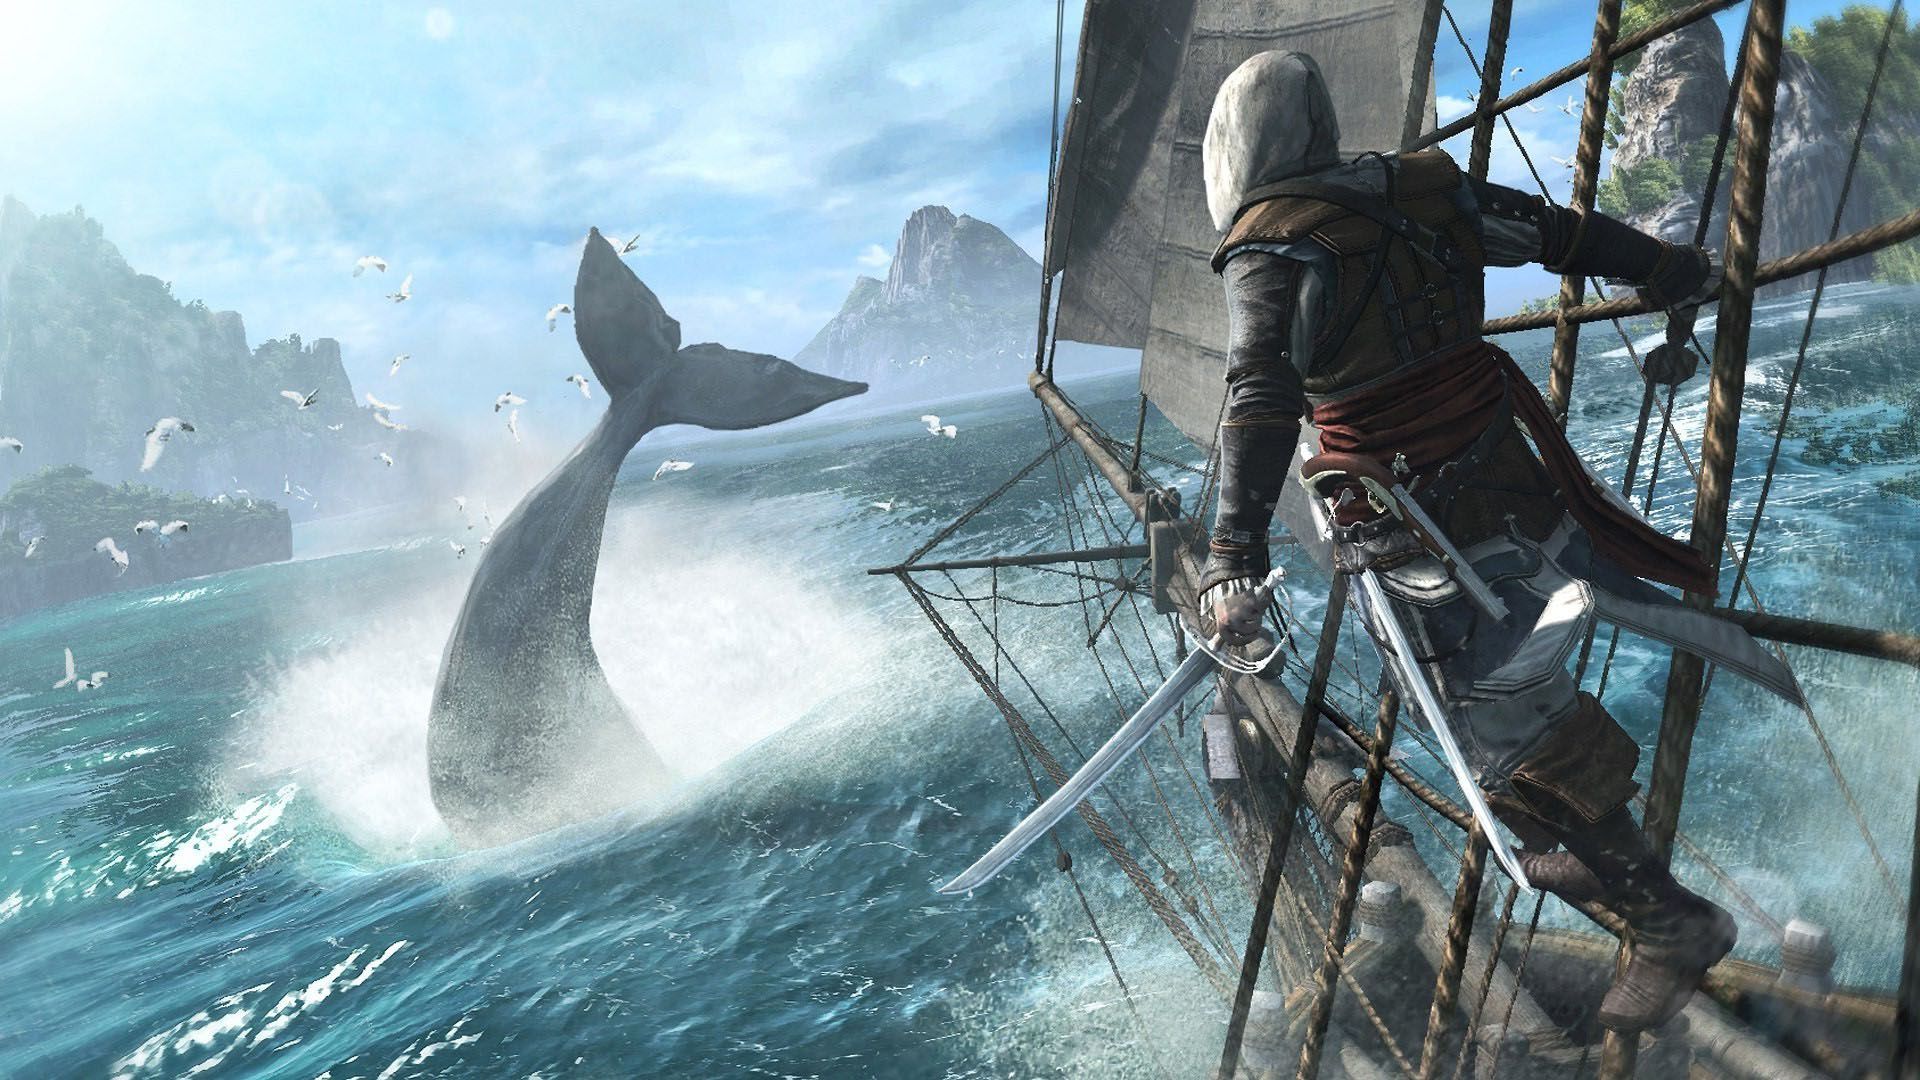 Assassin's Creed 4: Black Flag and Assassin's Creed Rogue might be